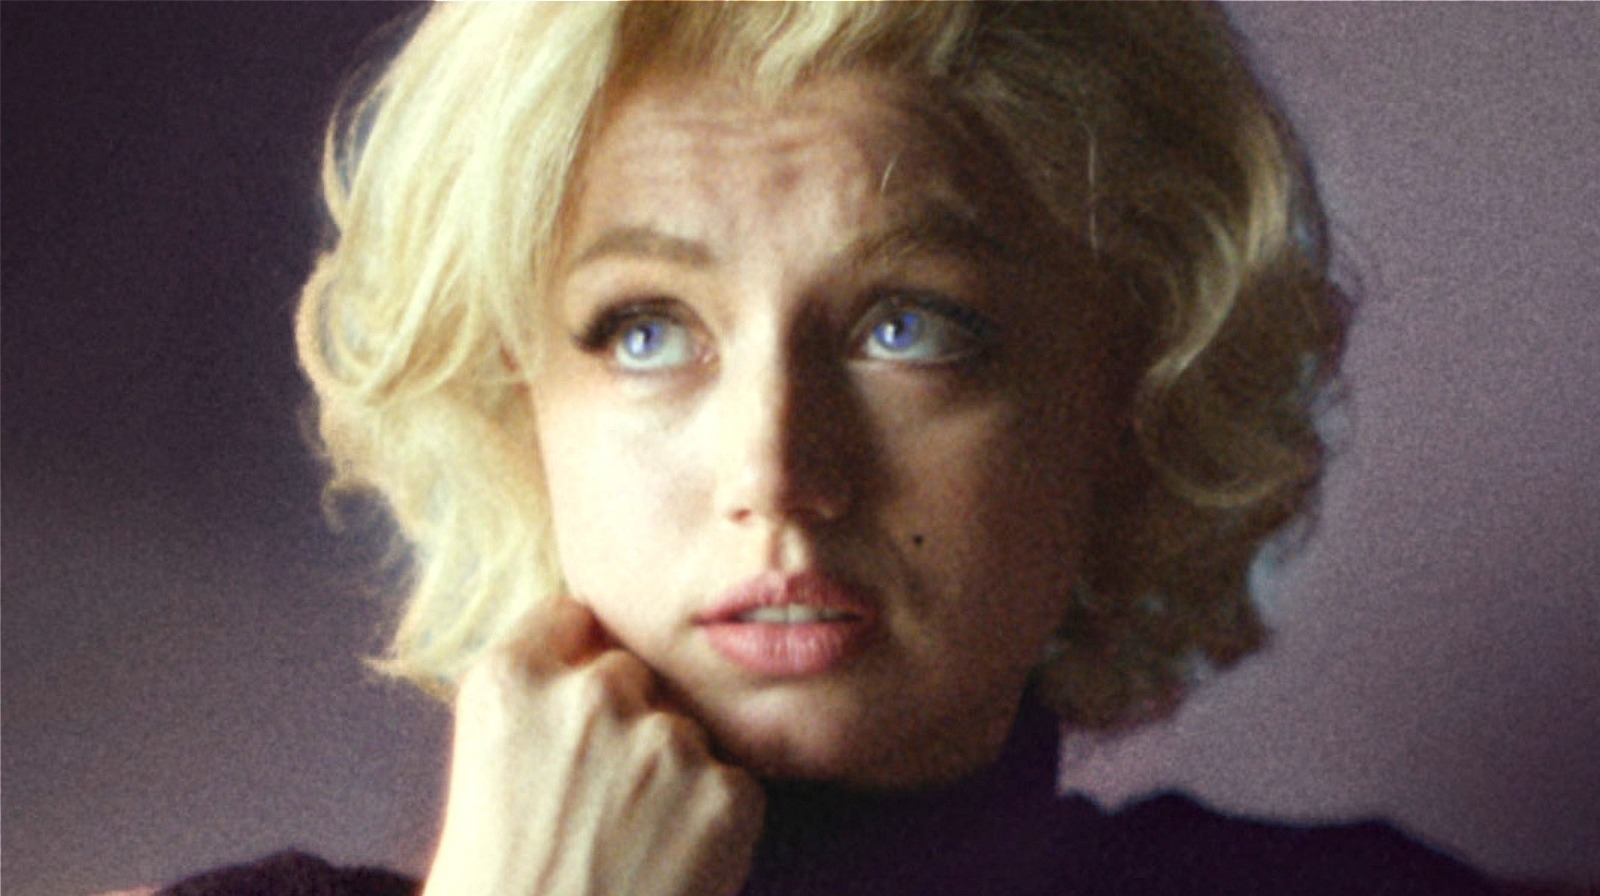 Why is 'Blonde' – Netflix's Marilyn Monroe biopic – rated NC-17 instead of  TV-MA?